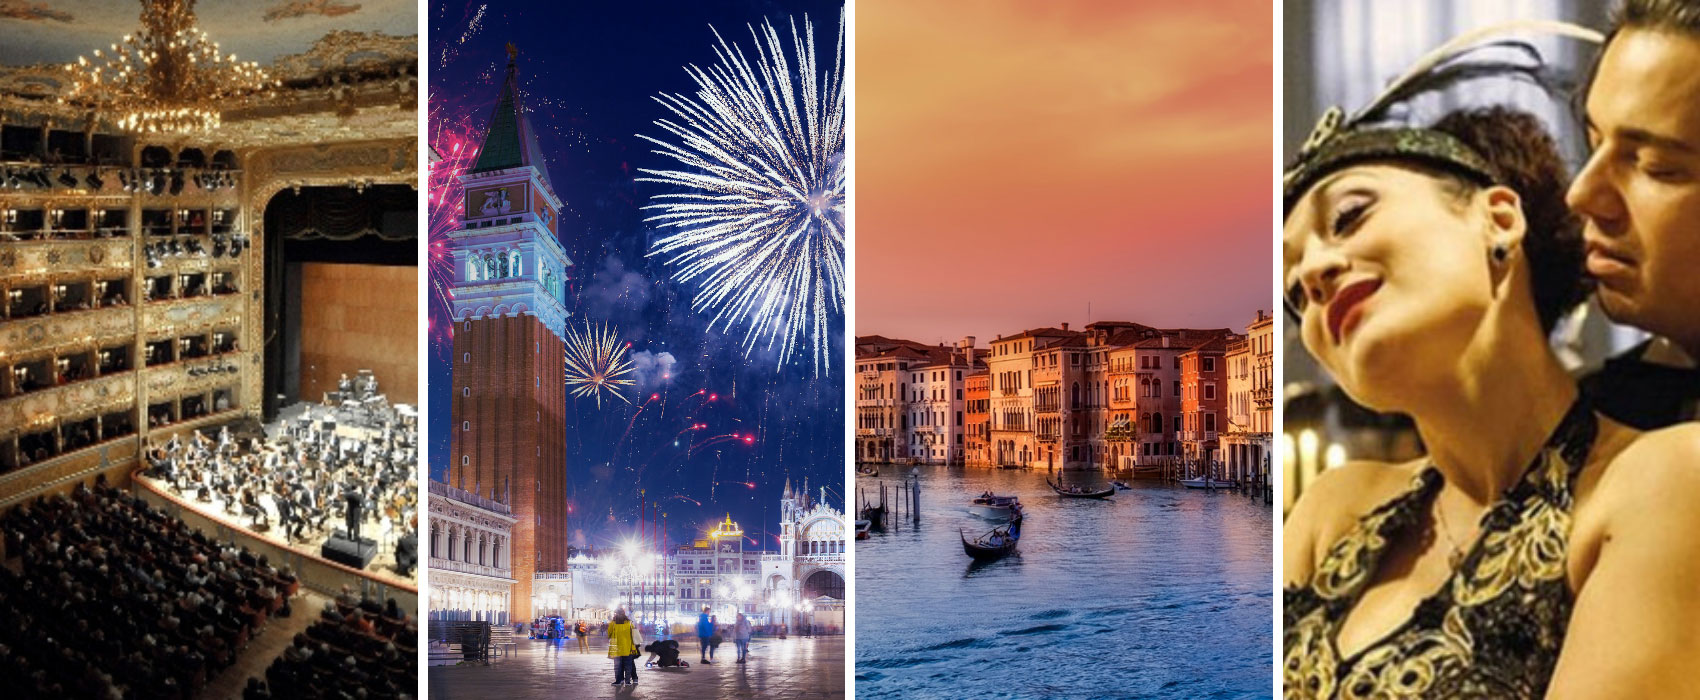 Venice from 29/12 to 01/01: A sparkling New Year